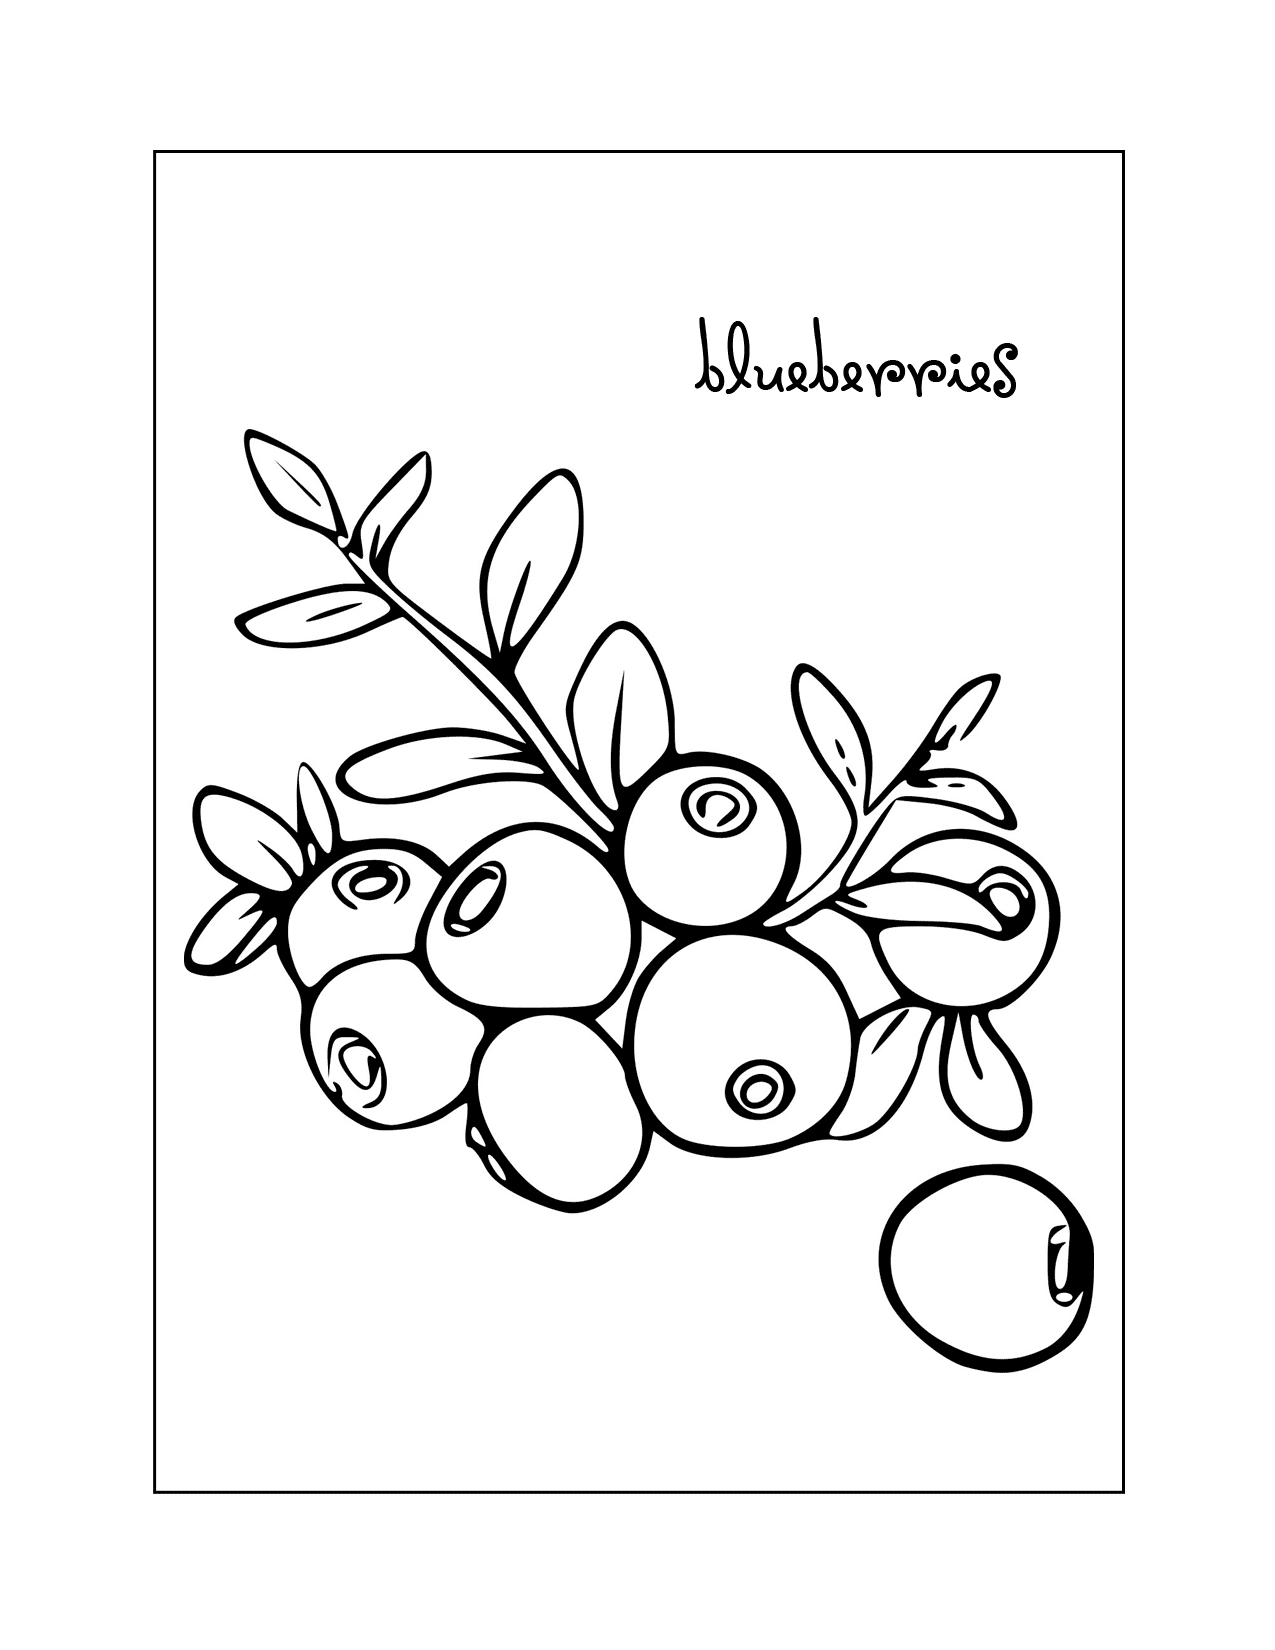 Blueberries Art Coloring Page